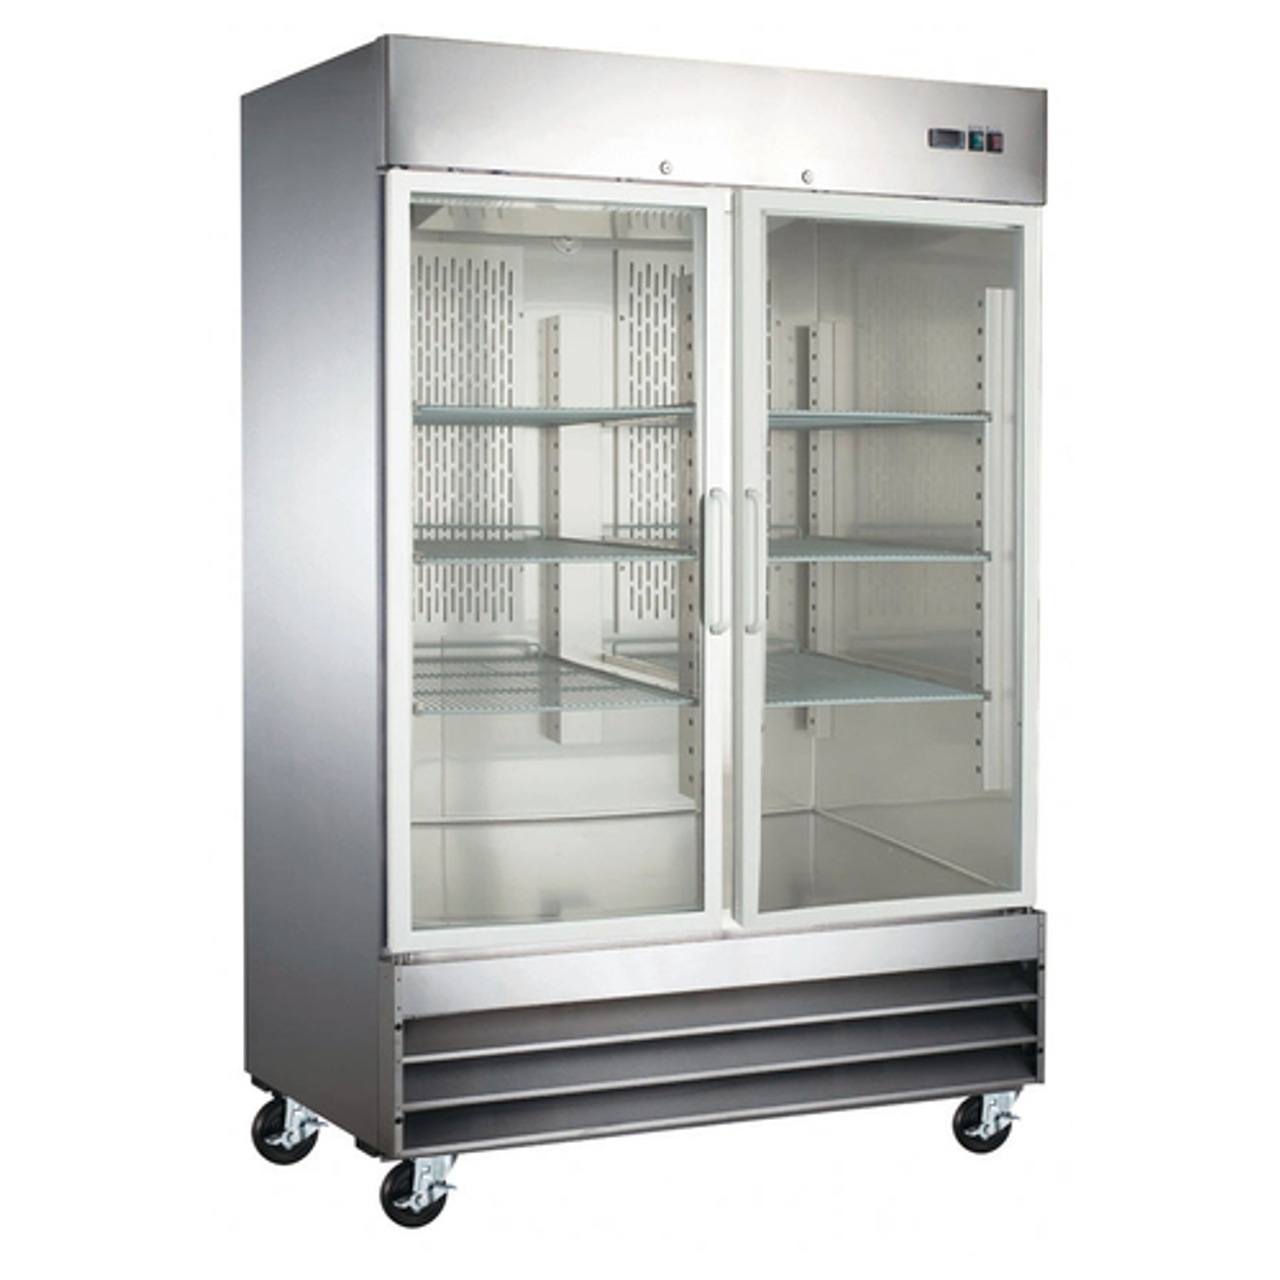 Falcon AR-49G Refrigeration, Reach-In, 2 Section, Glass Doors, 41.3 cu. ft.